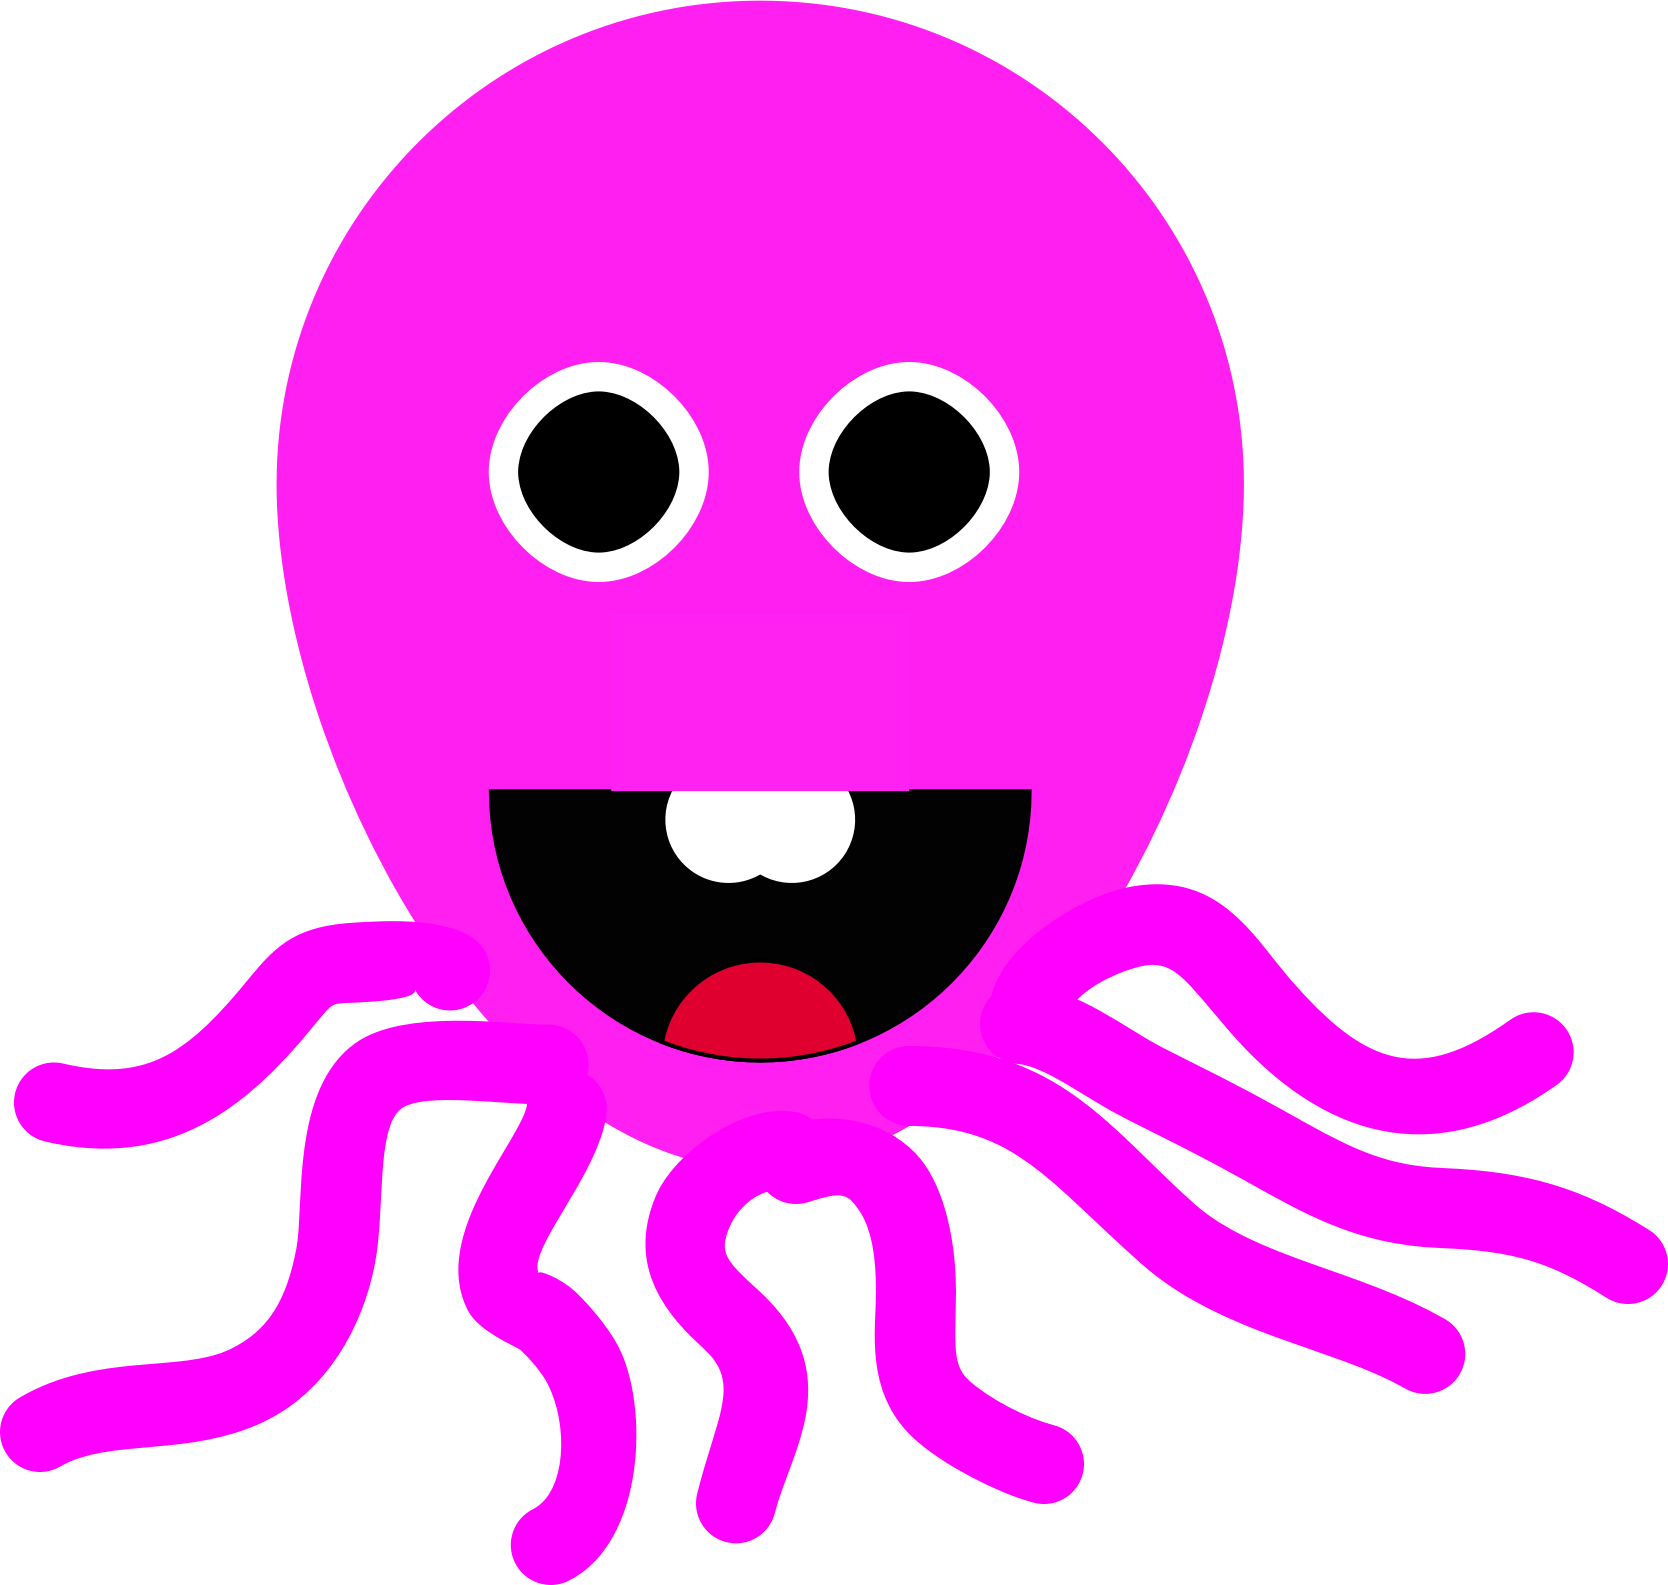 octopus clipart vector free - photo #32